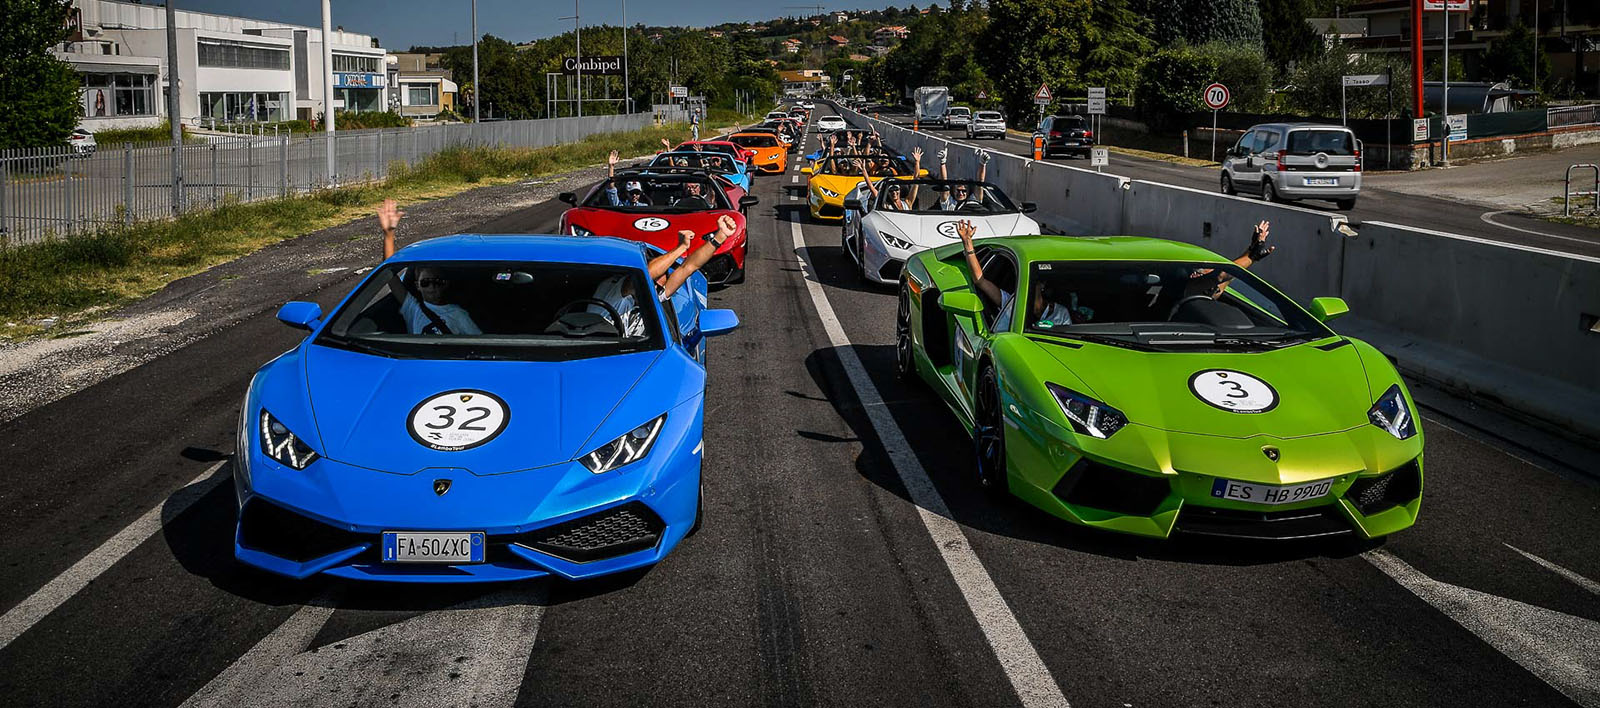 3 Days, 30 Lamborghinis and the Beauty of Italy: The Italian Tour 2016 4